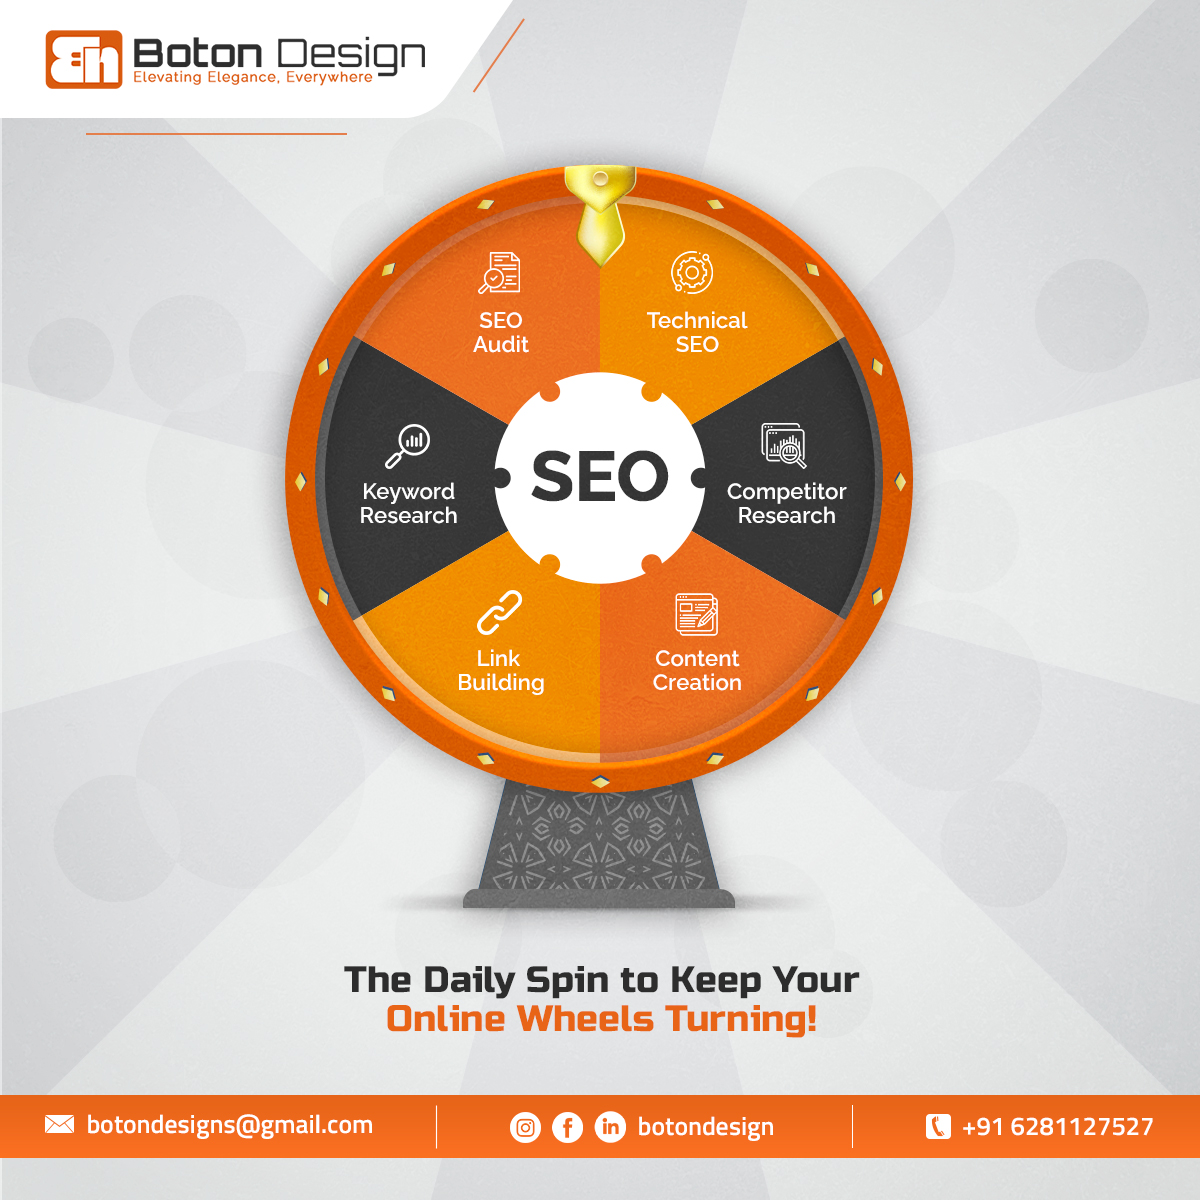 The life cycle of SEO involves link building, content creation, and SEO audit. 
#SEO #LinkBuilding #ContentCreation #SEOAudit #CompetitorResearch #KeywordResearch #WebOptimization #TechnicalSEO